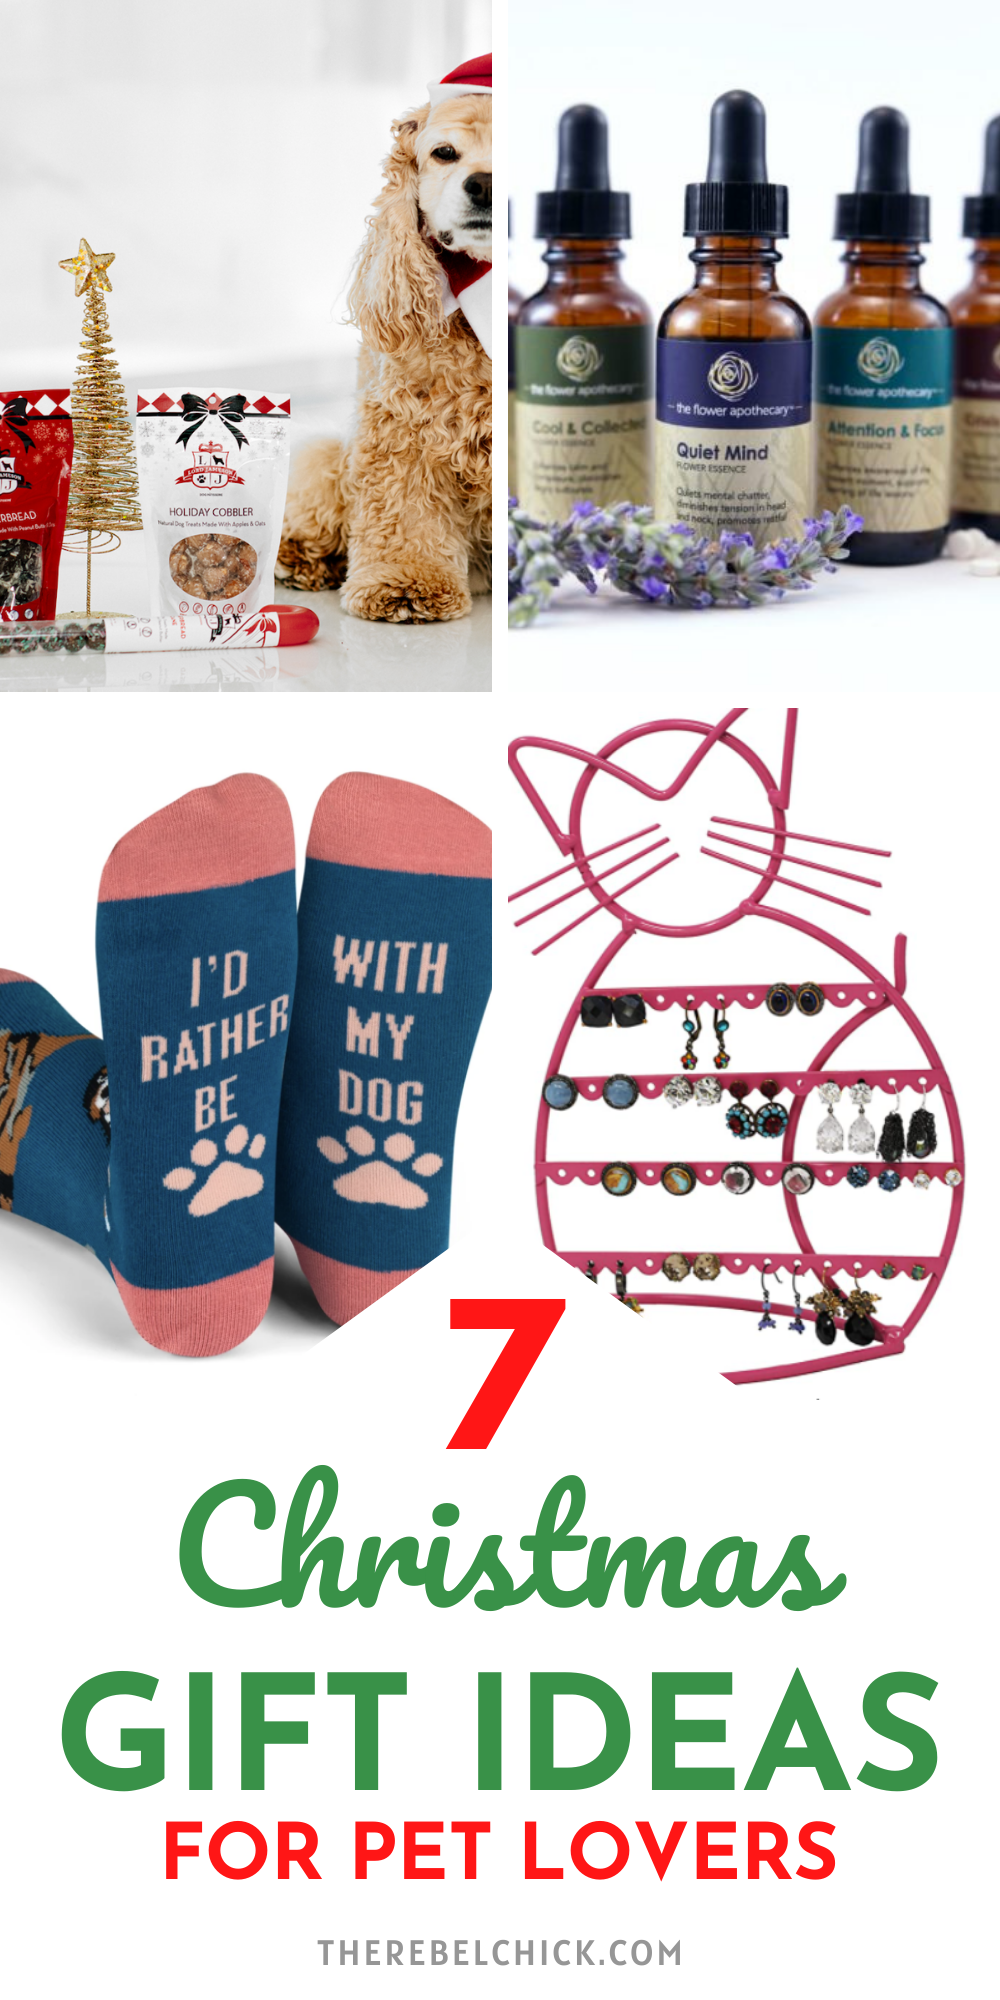 The Perfect Holiday Gifts for Pet Lovers